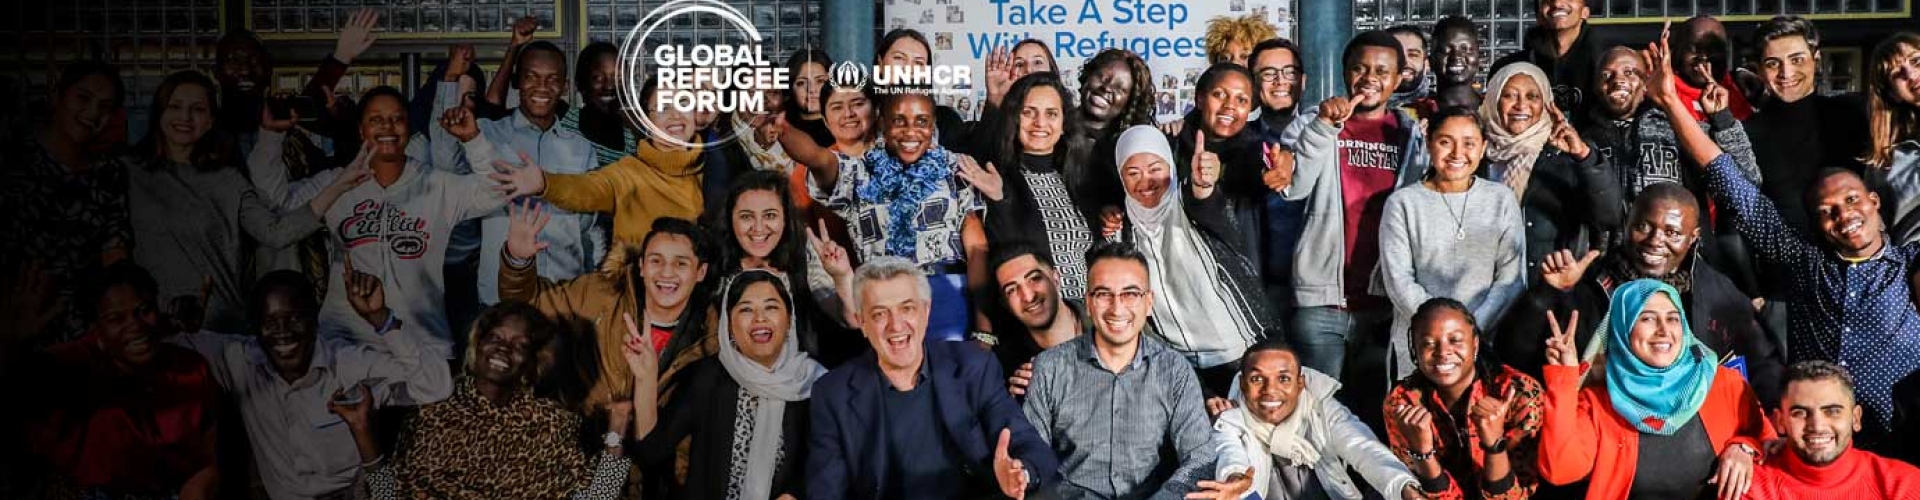 Global Refugee Forum pledges collective action for better refugee inclusion, education, jobs